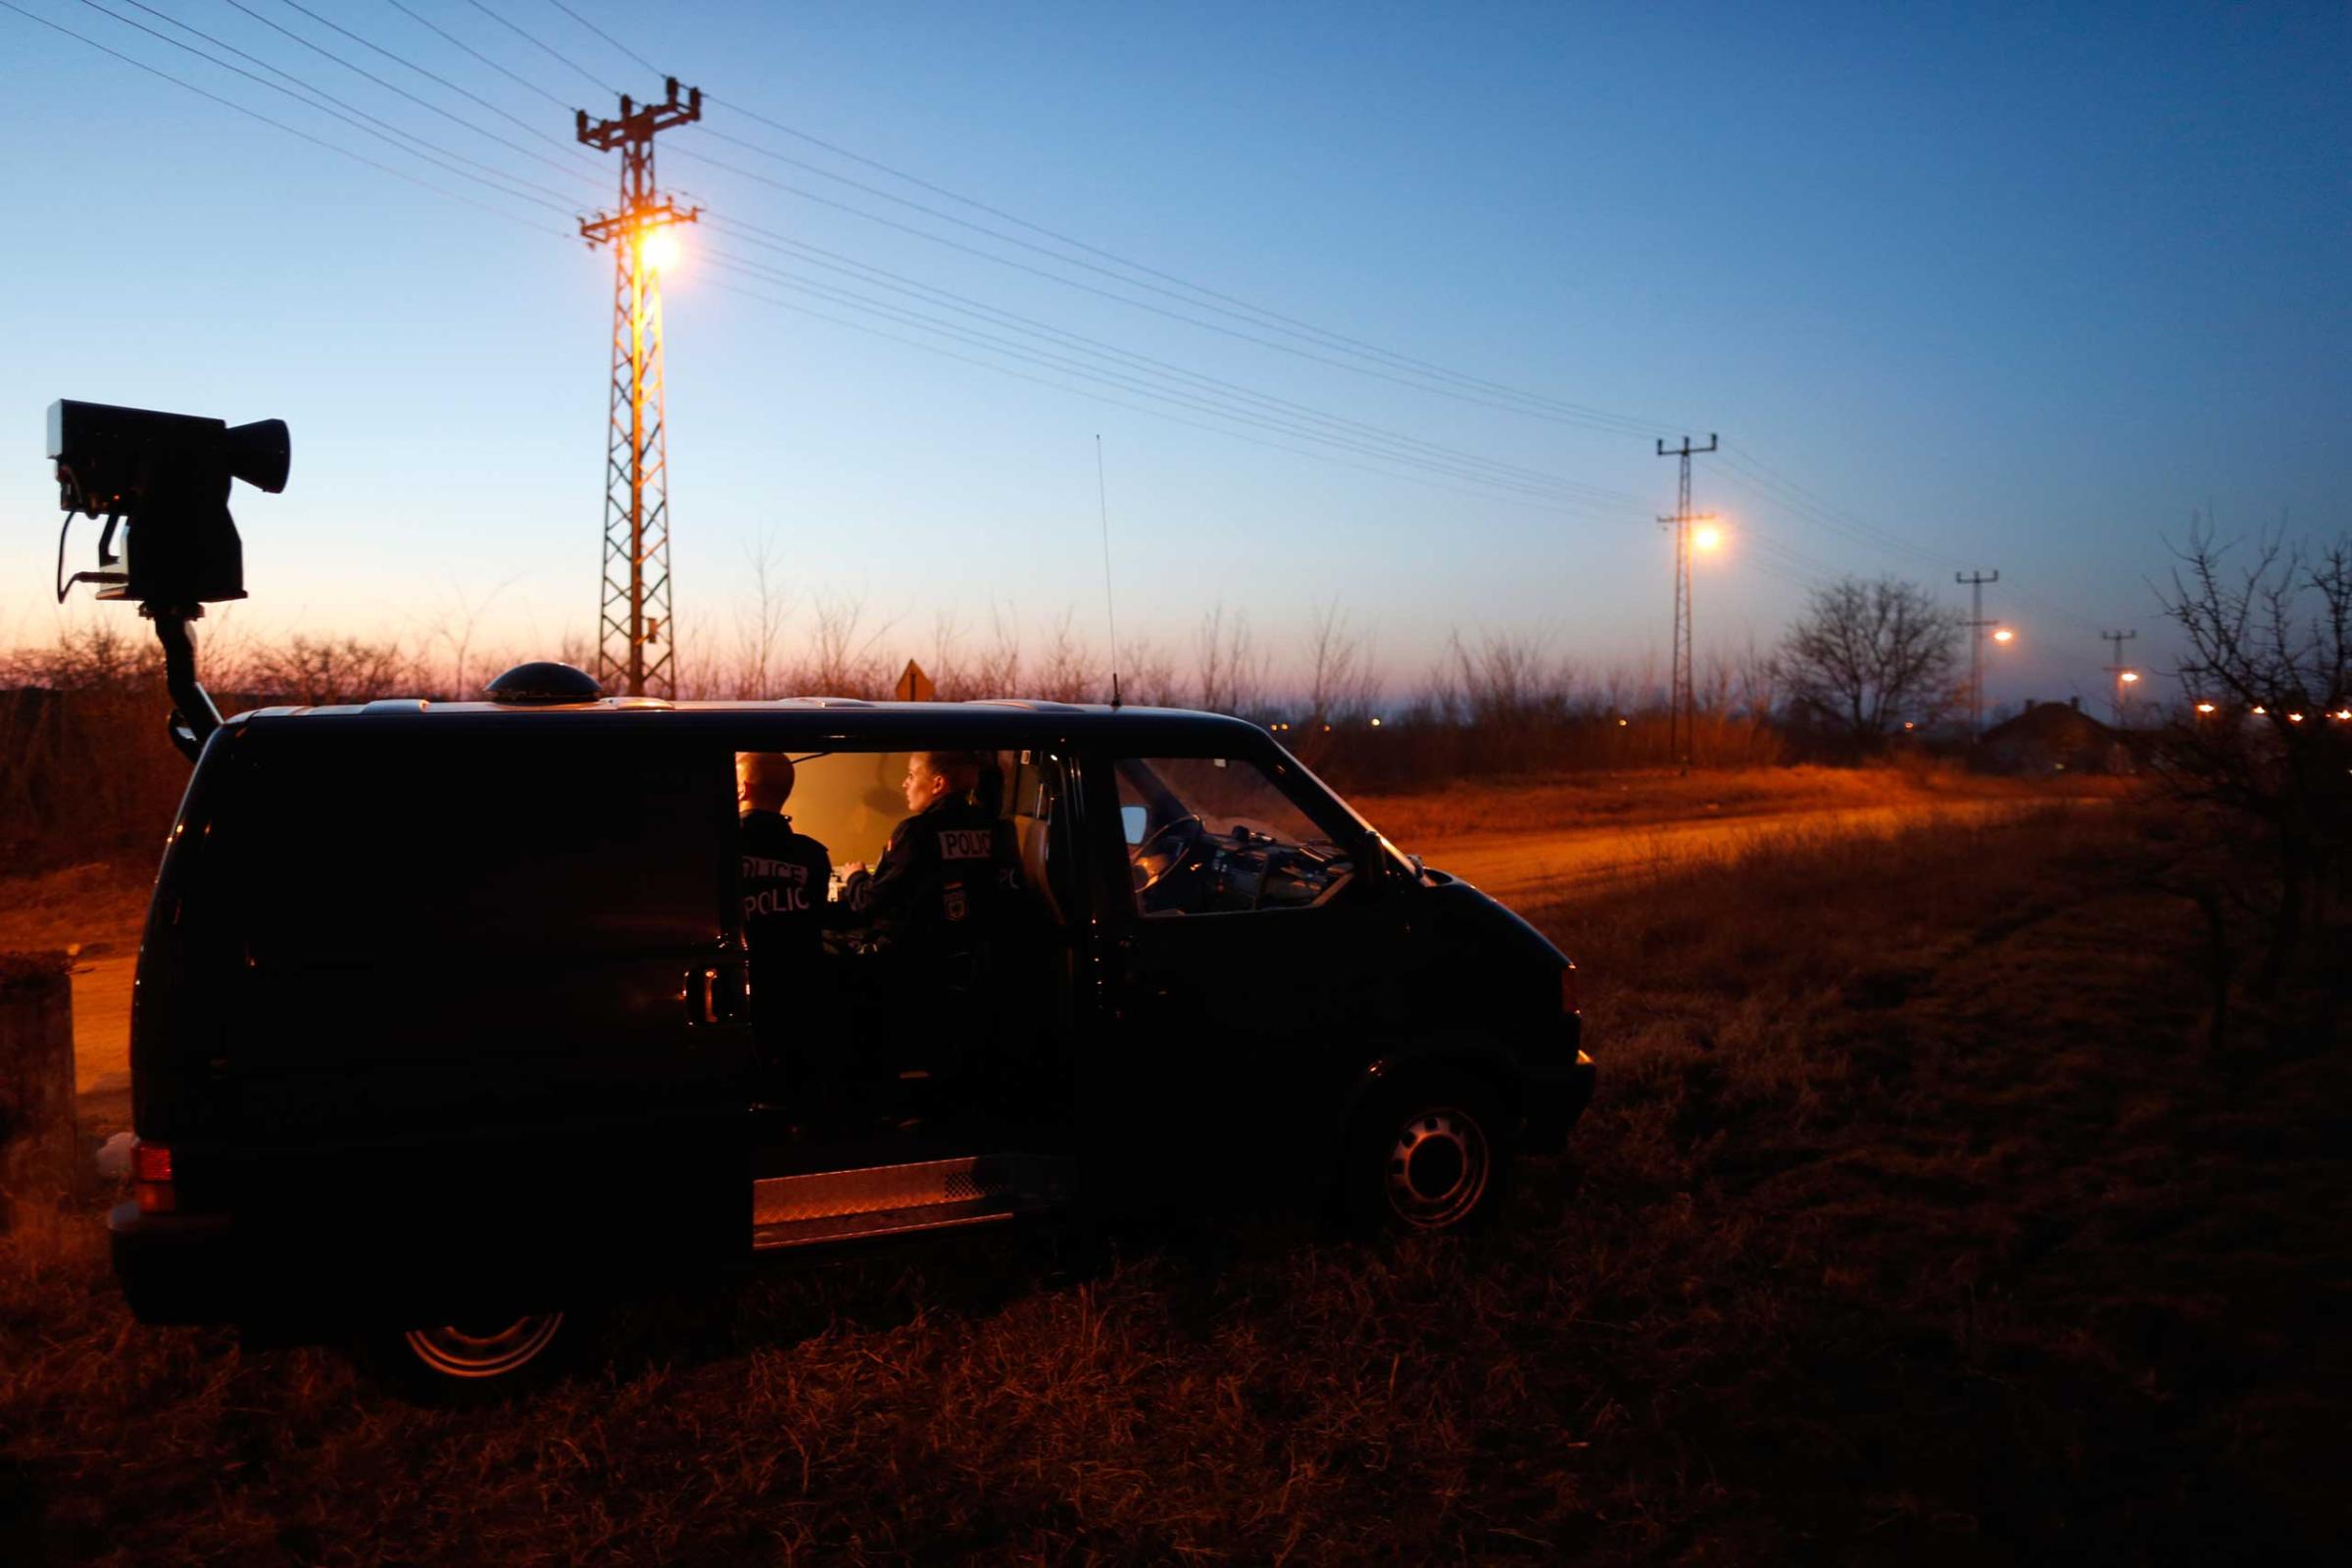 Members of the German border police sit in a van as they check a security camera while monitoring a stretch of the Serbian border with Hungary in the village of Hajdukovo, some 110 miles north of Belgrade, Serbia on Feb. 13, 2015.